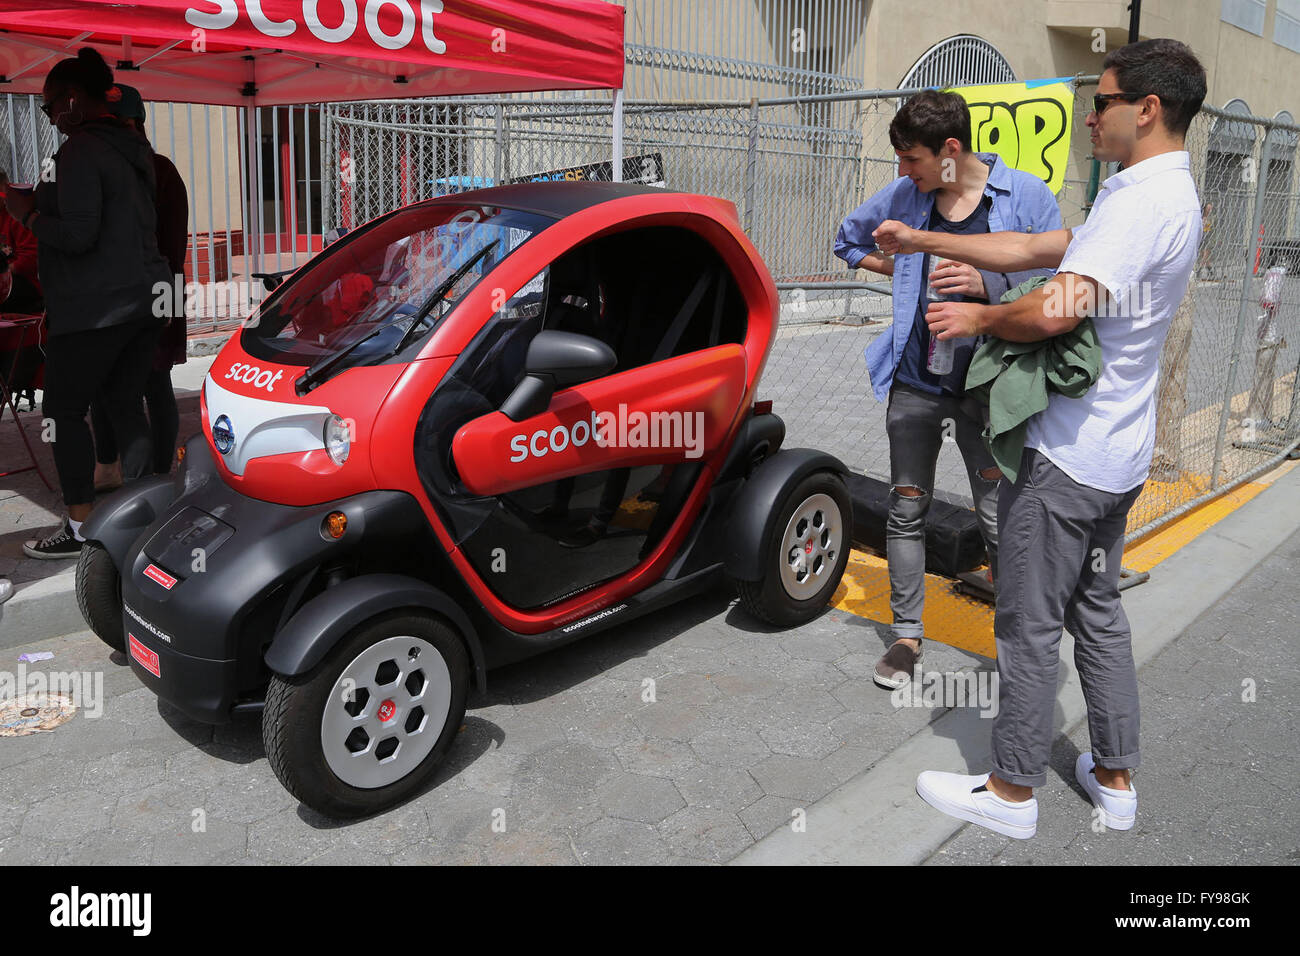 San Francisco, USA. 23rd Apr, 2016. Two Earth Day event visitors look at an electric vehicle in downtown San Francisco, the United States, on April 23, 2016. The annual Earth Day San Francisco Street Fest was held in San Francisco on Saturday. Environmental activists brought the public an educational and entertaining green event to help raise their ecological awareness. © Liu Yilin/Xinhua/Alamy Live News Stock Photo